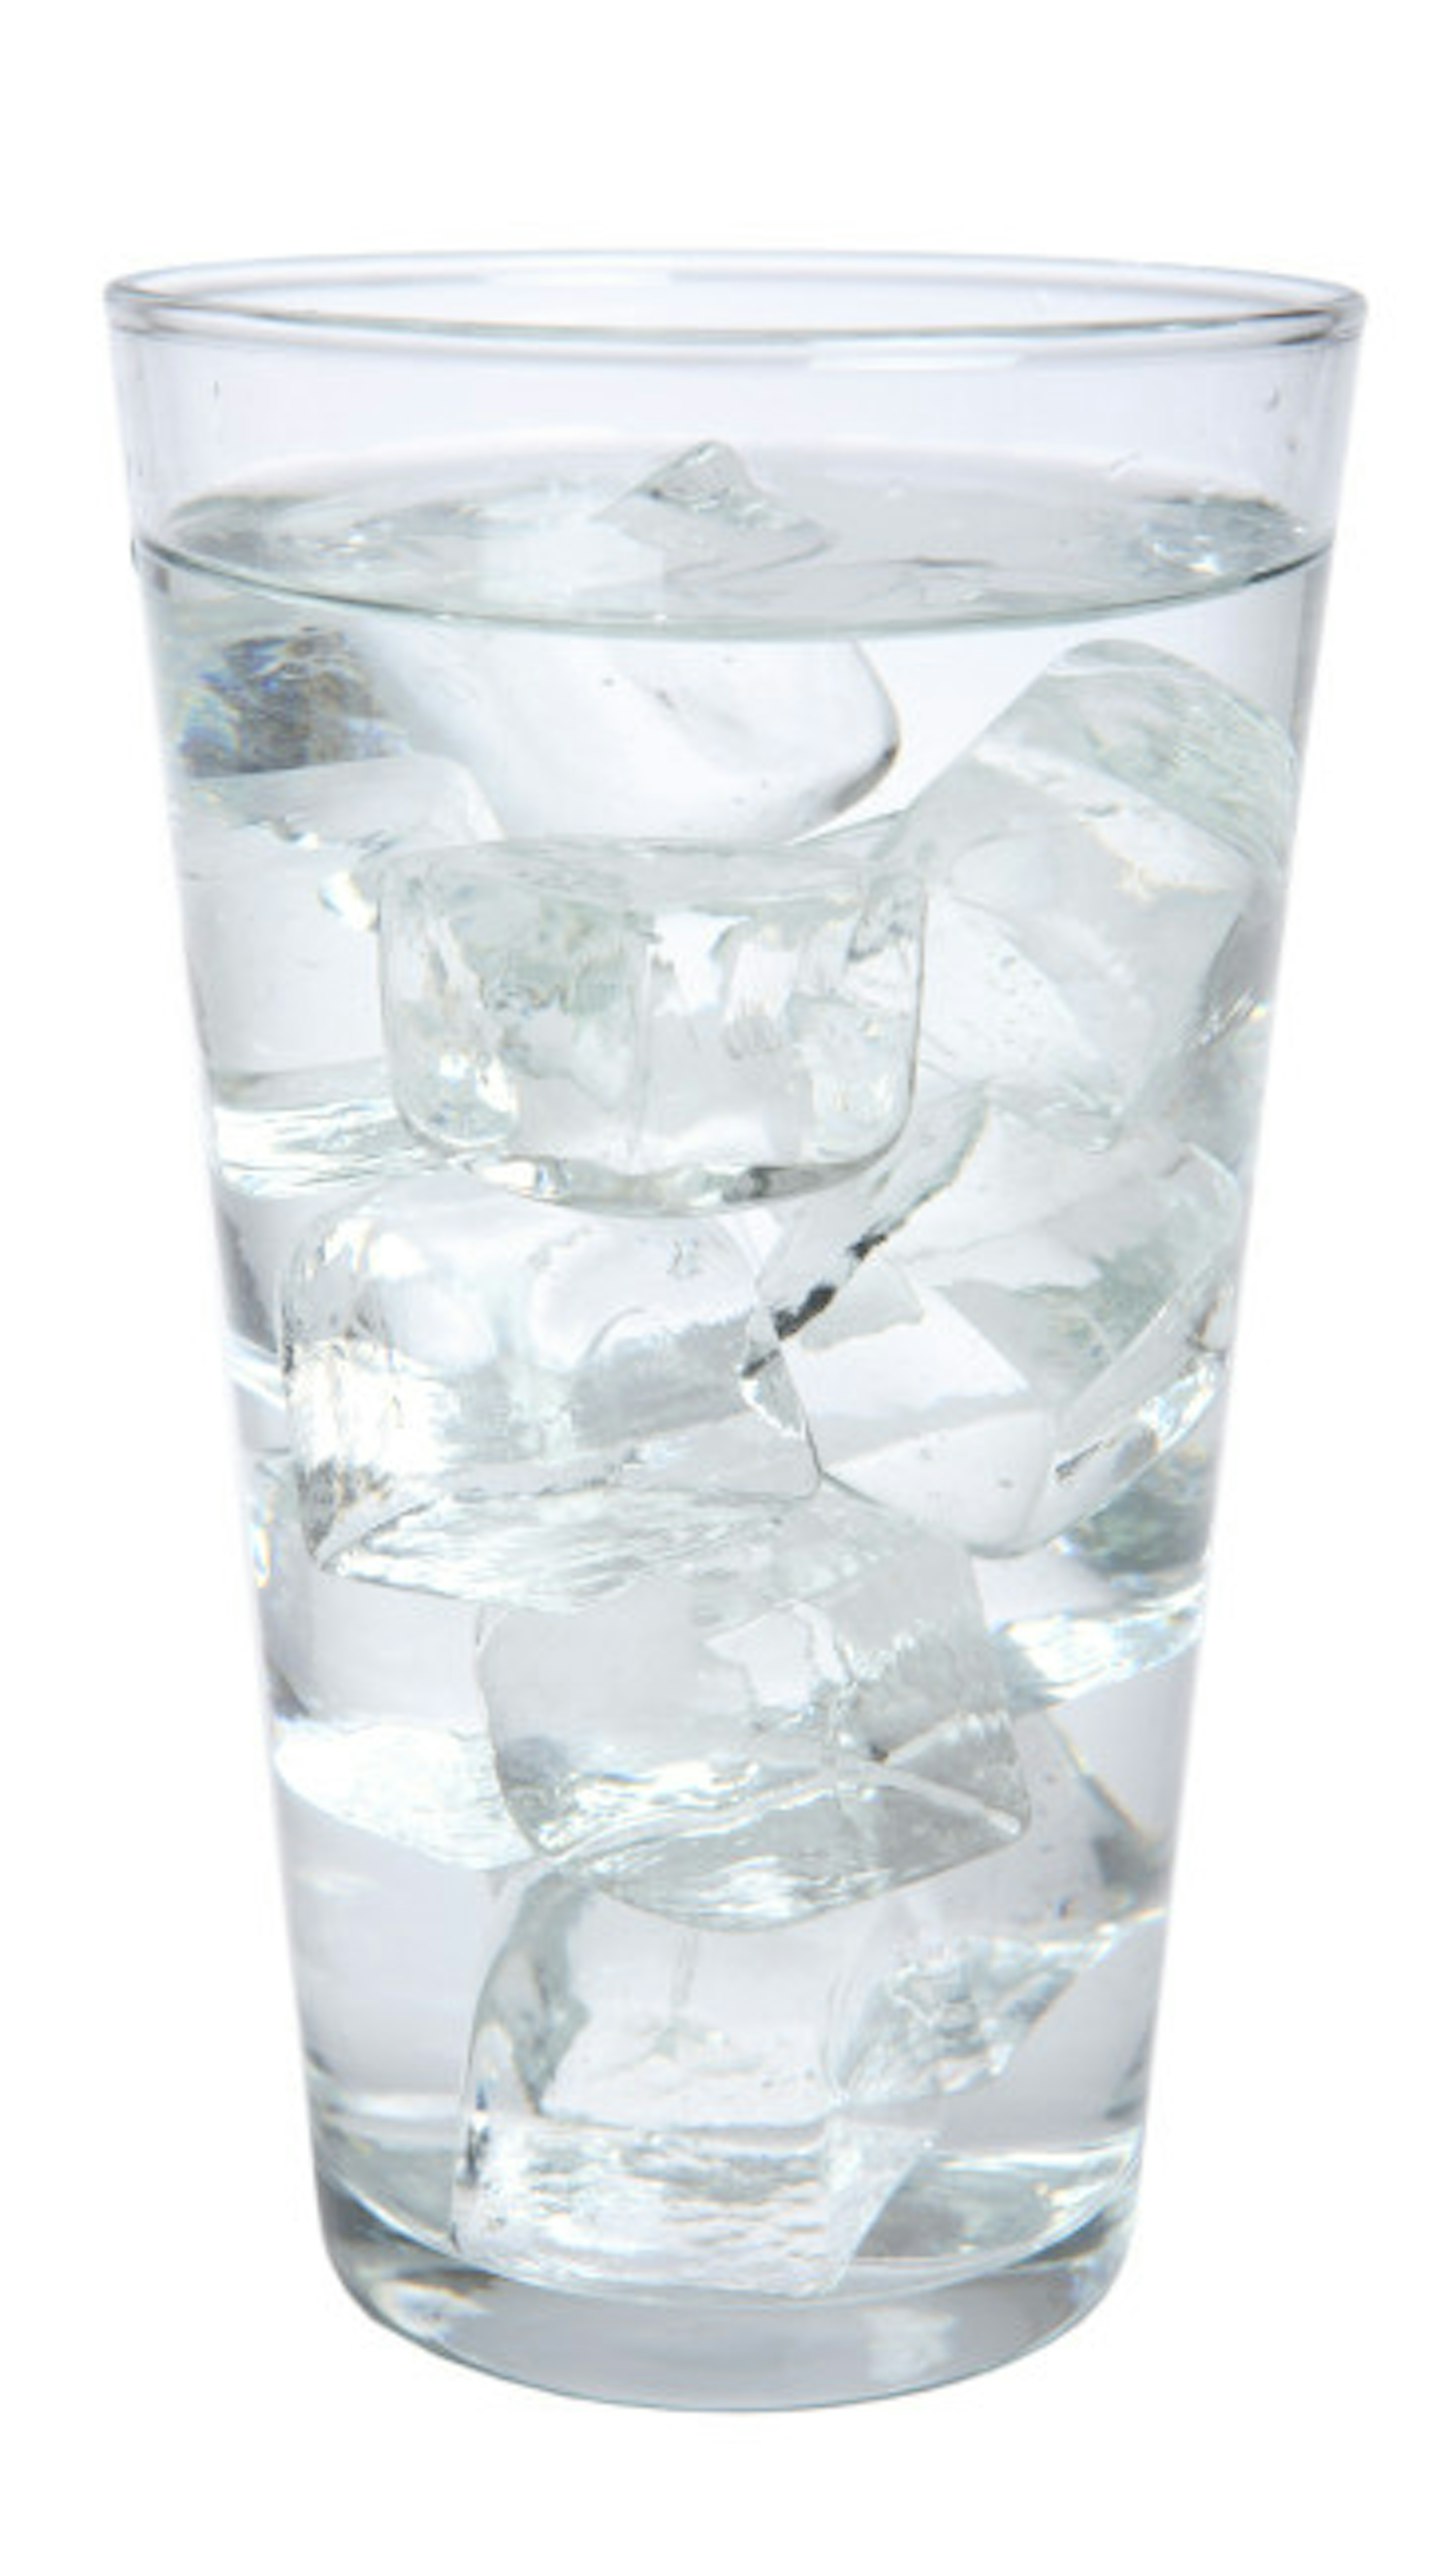 The diet recommends drinking ice water to help lose weight